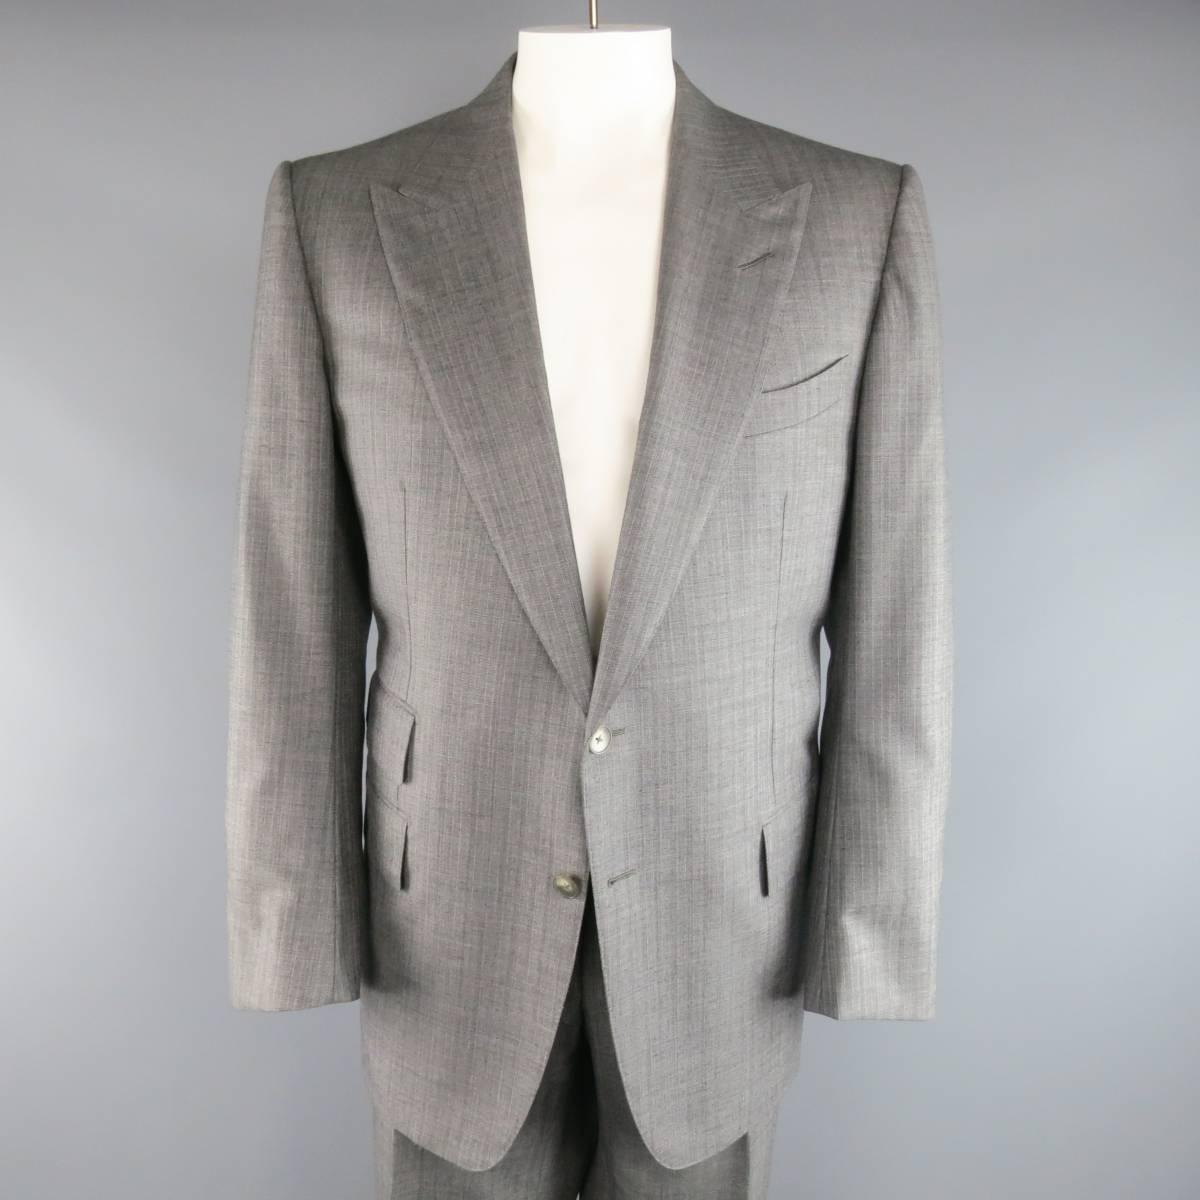 Tom Ford two piece suit comes in a gray herringbone wool fabric and includes a two button, peak lapel sport coat with flap pockets, and functional button cuffs with matching flat front, adjustable tab waistband dress pants. Made in Italy.

Excellent